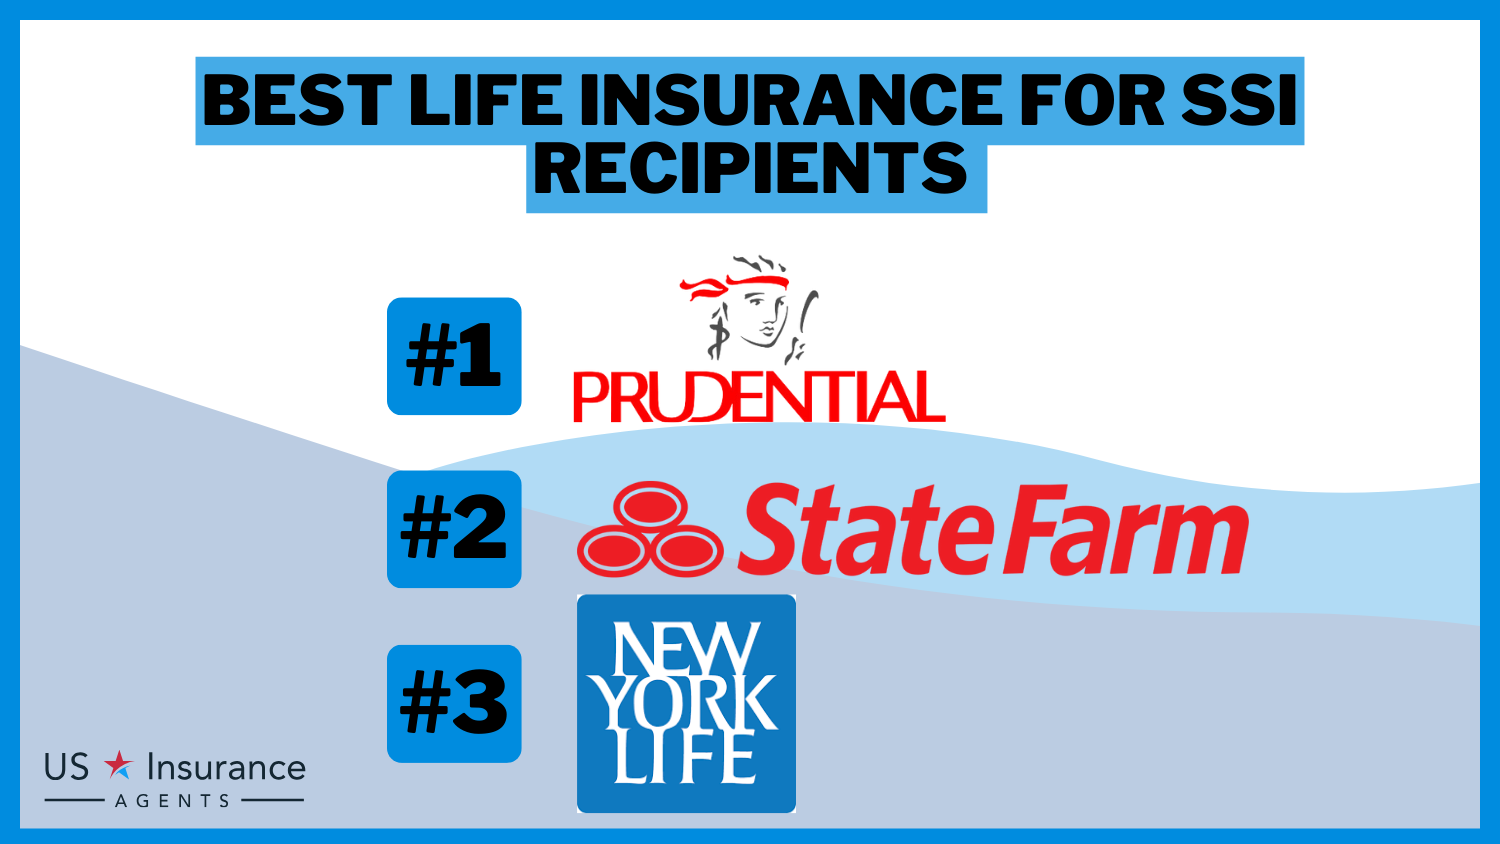 3 Best Life Insurance for SSI Recipients: Prudential, State Farm and New York Life.